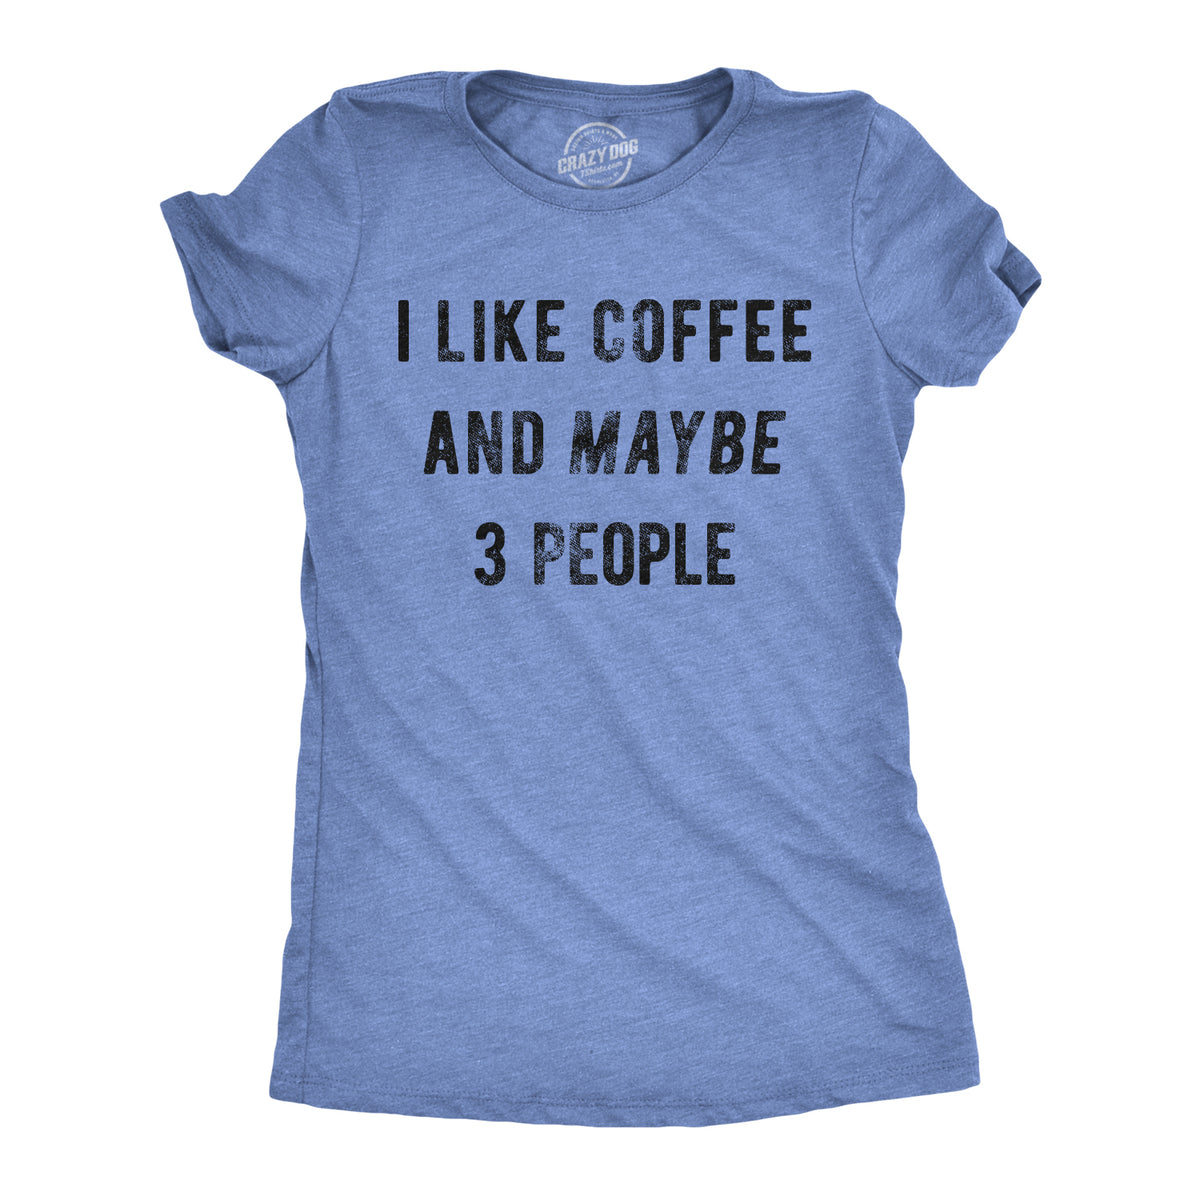 Funny Heather Light Blue I Like Coffee And Maybe 3 People Womens T Shirt Nerdy Coffee Introvert Tee